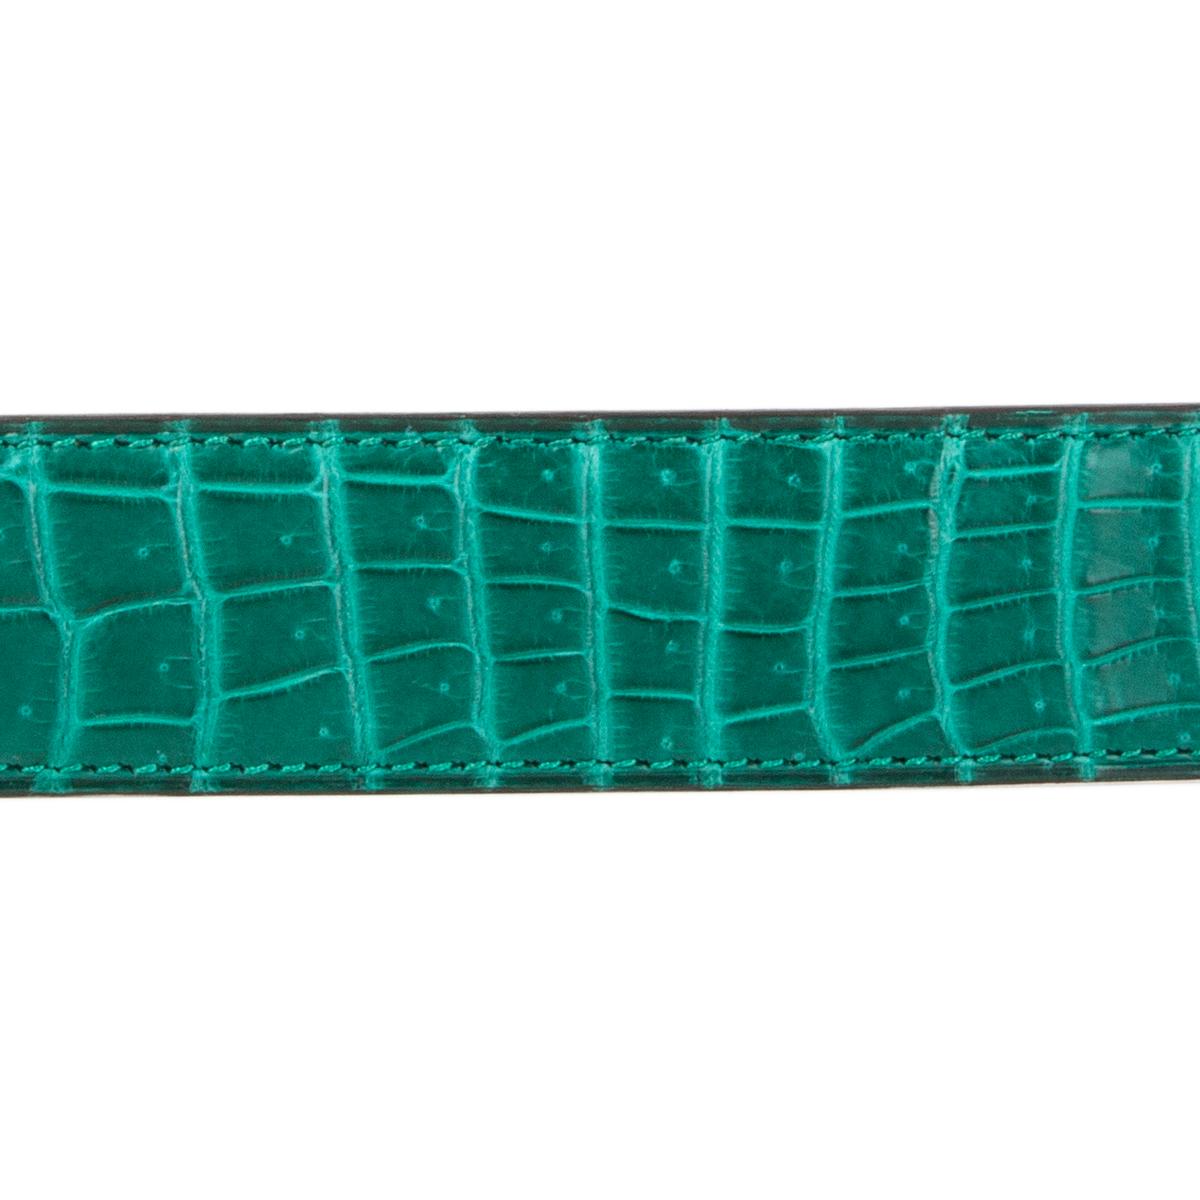 Hermes 32mm belt strap in Malachite (green) Shiny Porosus crocodile. Brand new. Comes with box and CITES.

Tag Size 100
Width 3.2cm (1.2in)
Fits 97cm (37.8in) to 102cm (39.8in)
